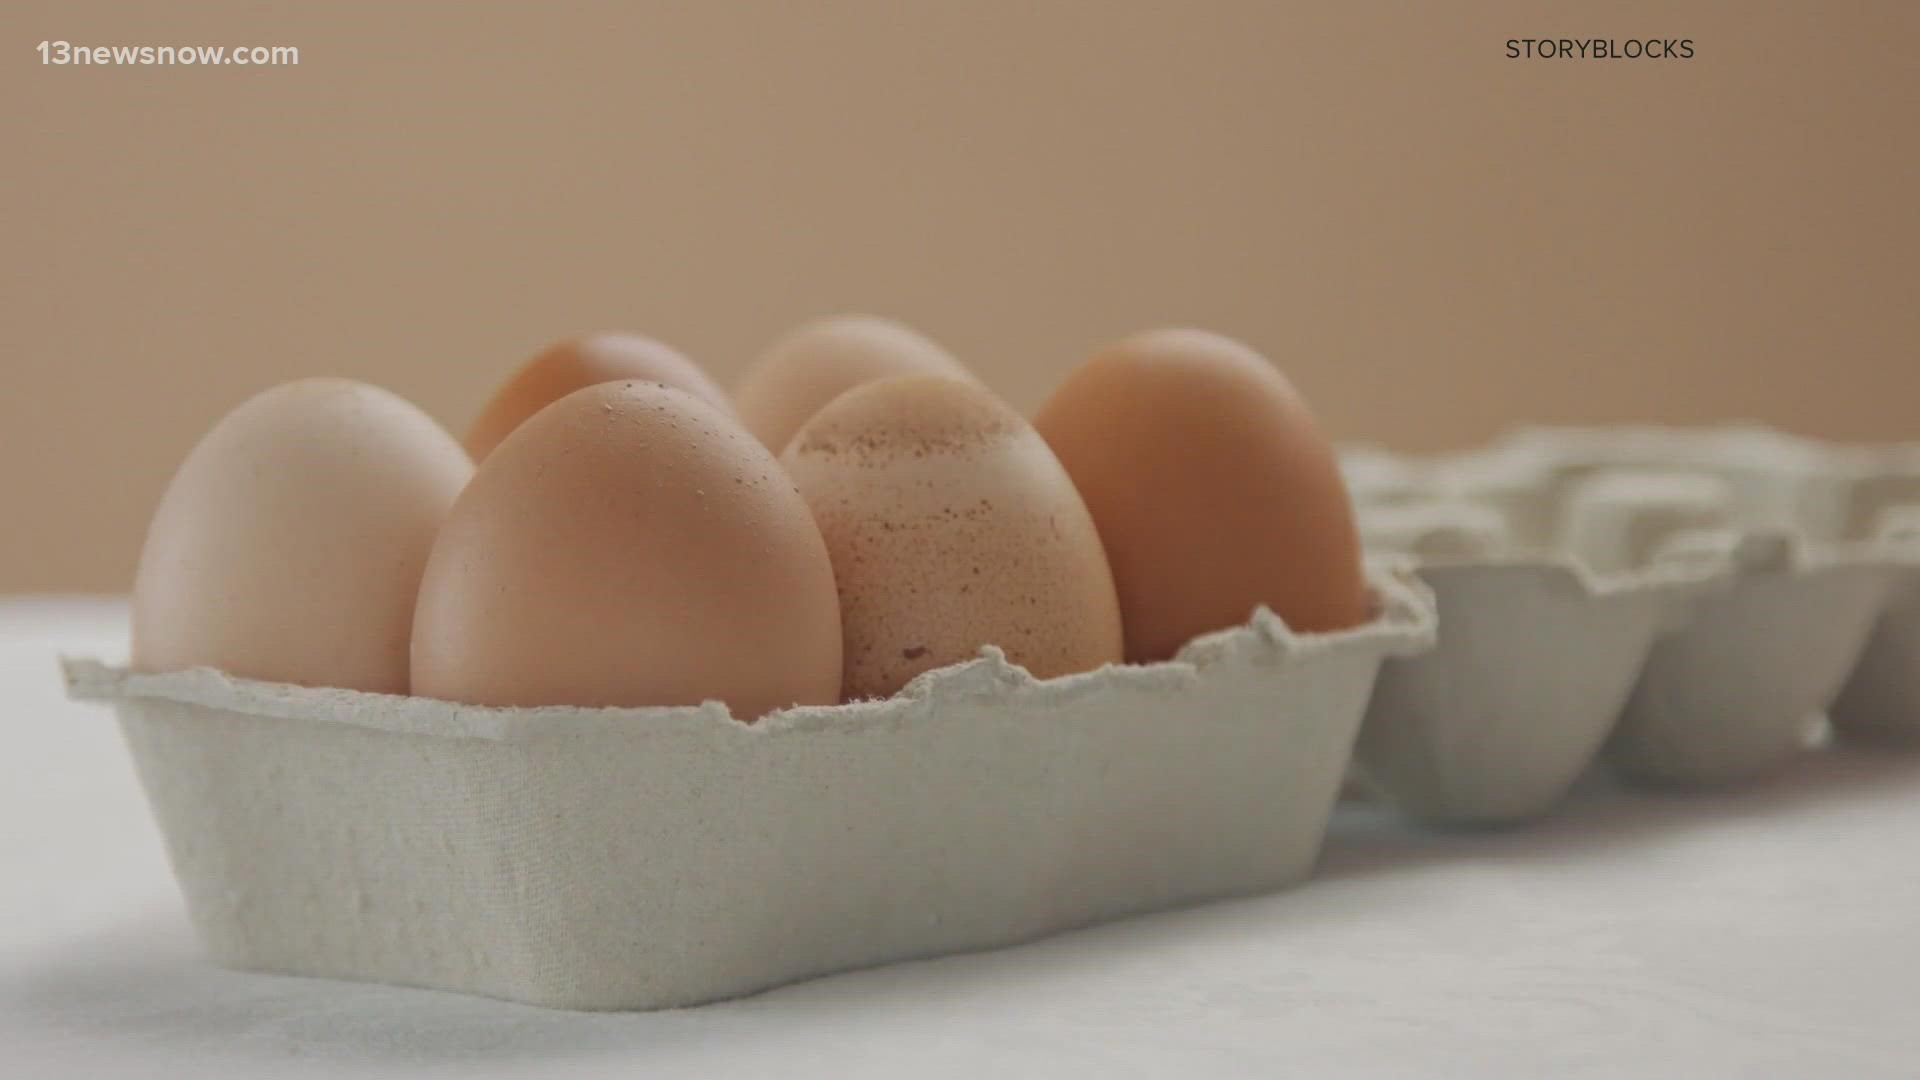 The cost of eggs jumped from $1.67 at the beginning of 2022 to $4.65 by the end of the year, according to the U.S. Bureau of Labor Statistics.